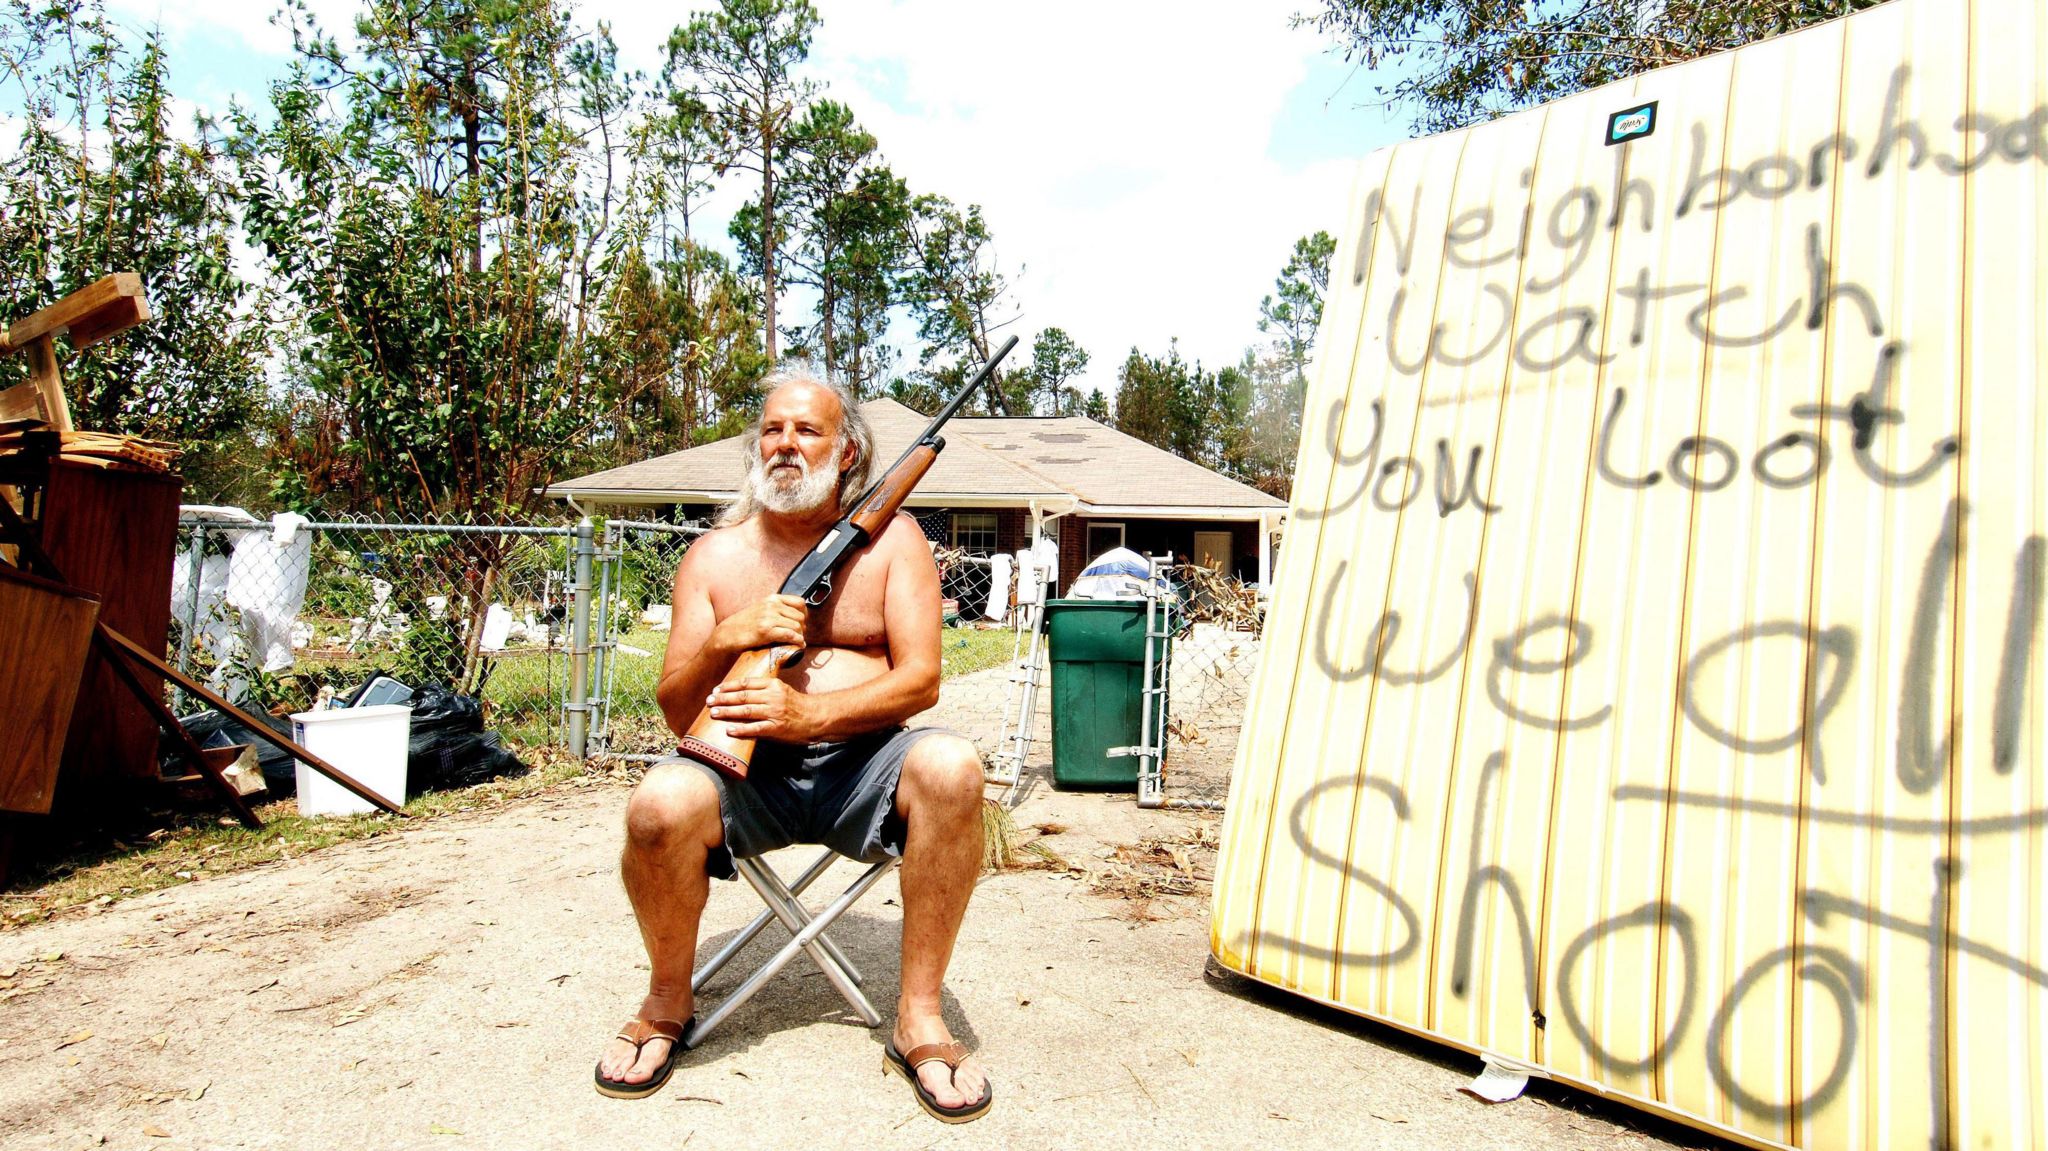 A man sits in shorts and flip flops, holding a gun. He is next to a sign which reads "neighbourhood watch you loot we all shoot".